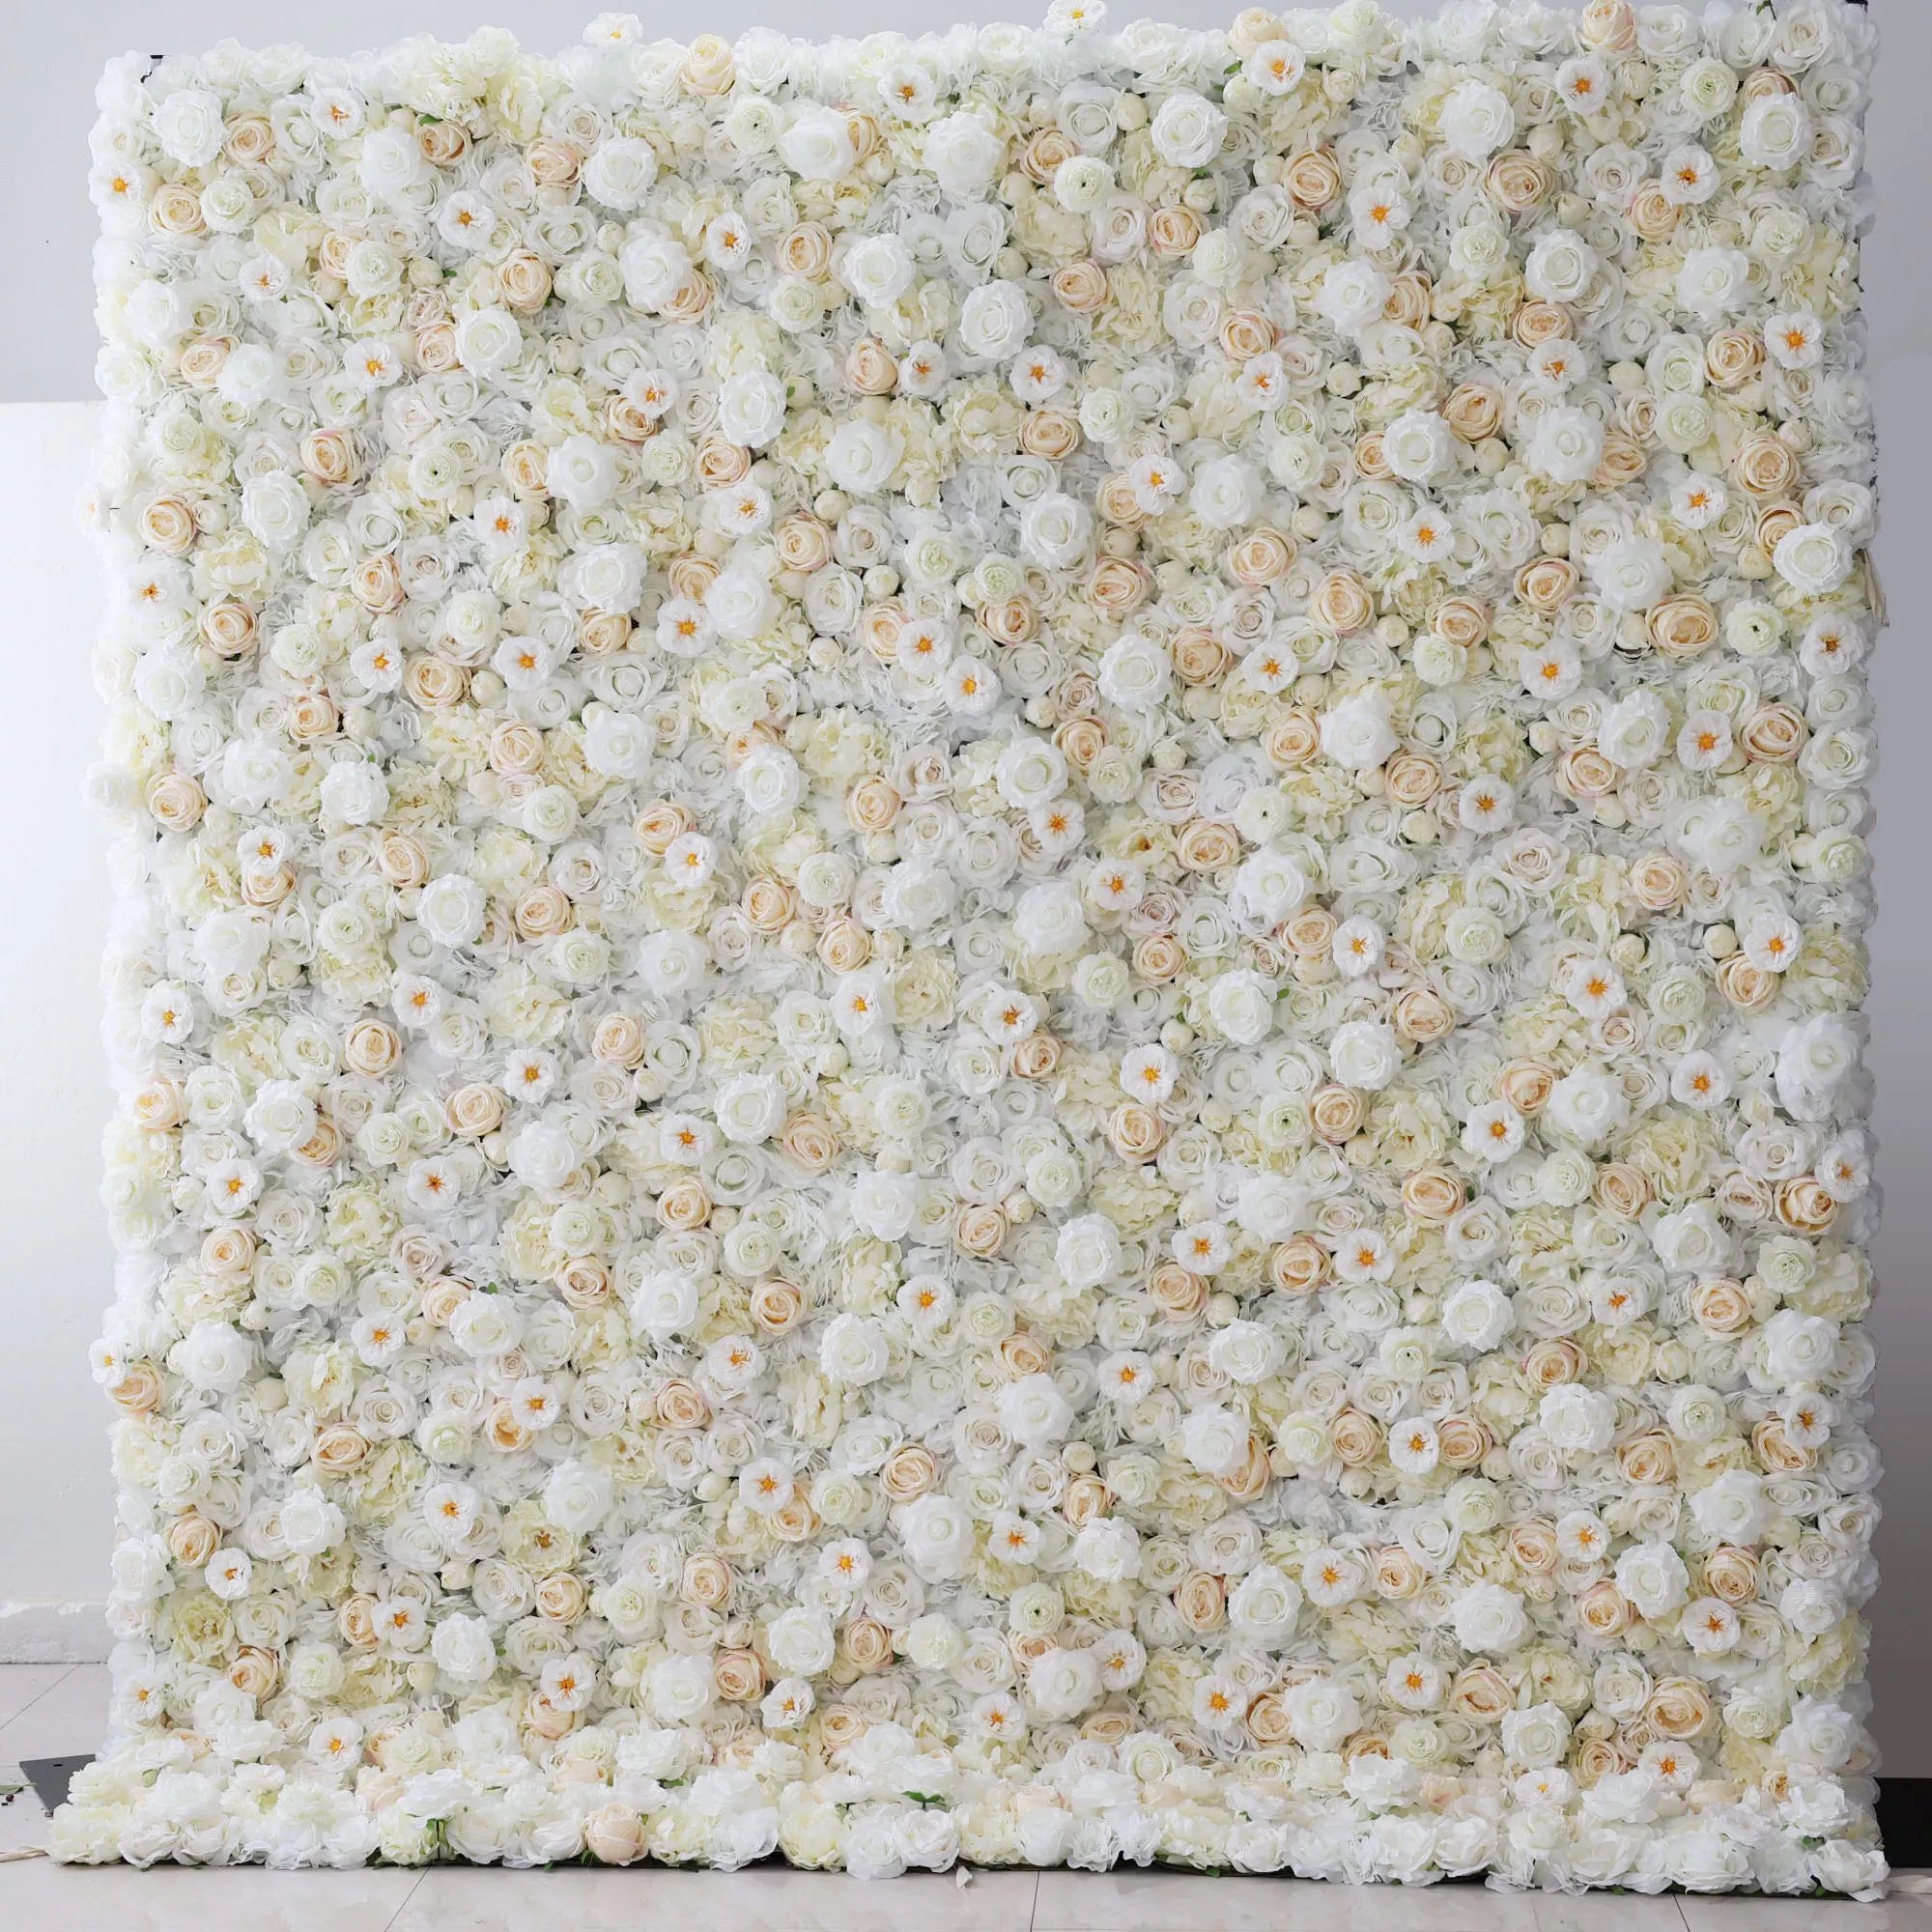 Valar Flowers Roll Up Fabric Artificial White, Cream and Champagne Flower Wall Wedding Backdrop, Floral Party Decor, Event Photography-VF-263